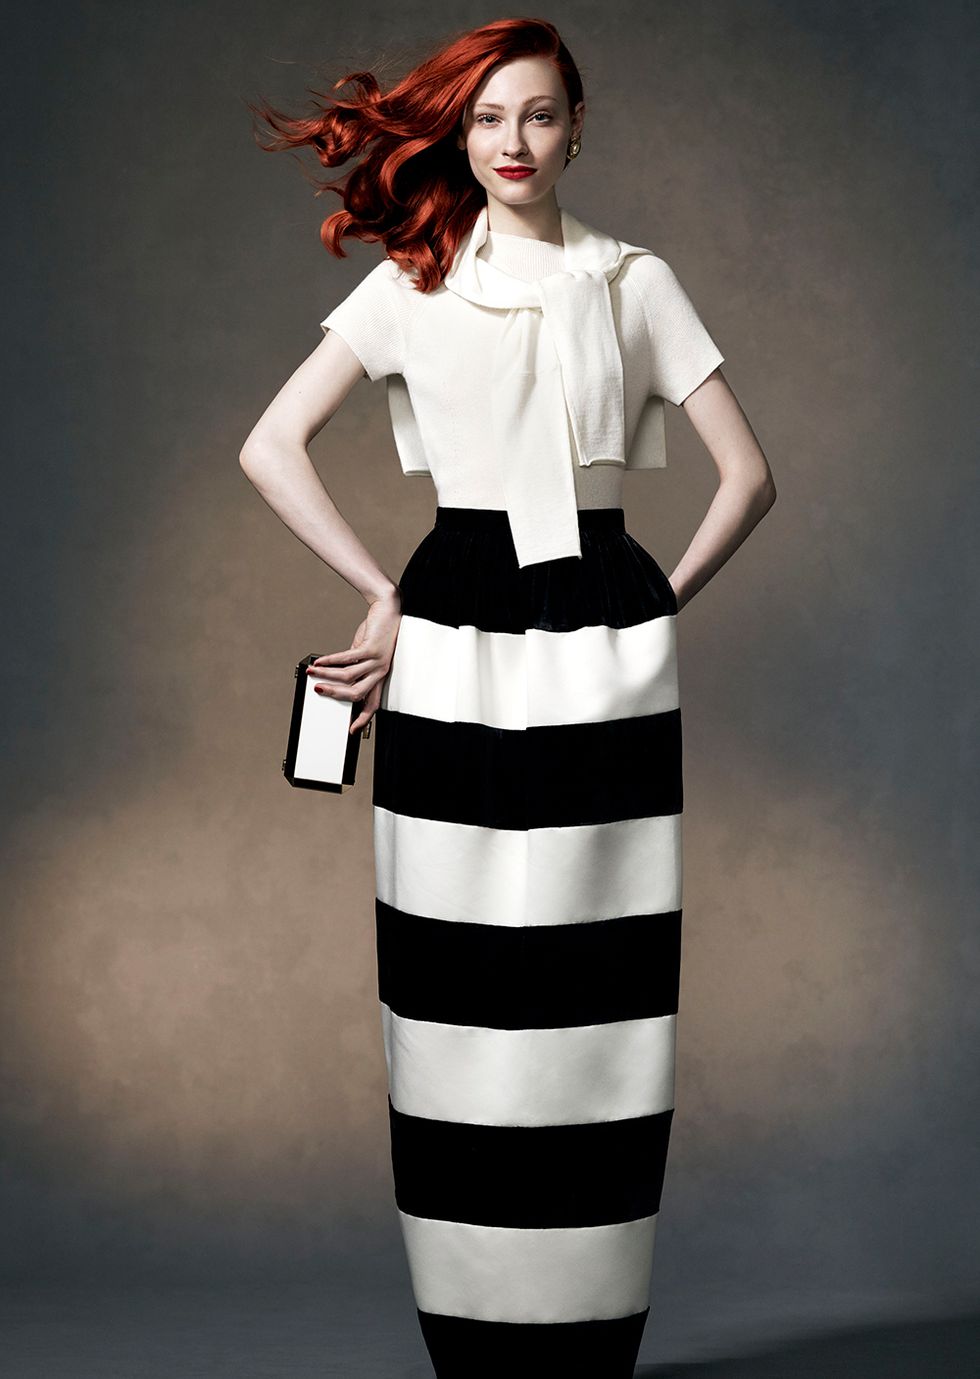 Sleeve, Shoulder, Standing, Joint, Style, Formal wear, Collar, Waist, Red hair, Fashion model, 